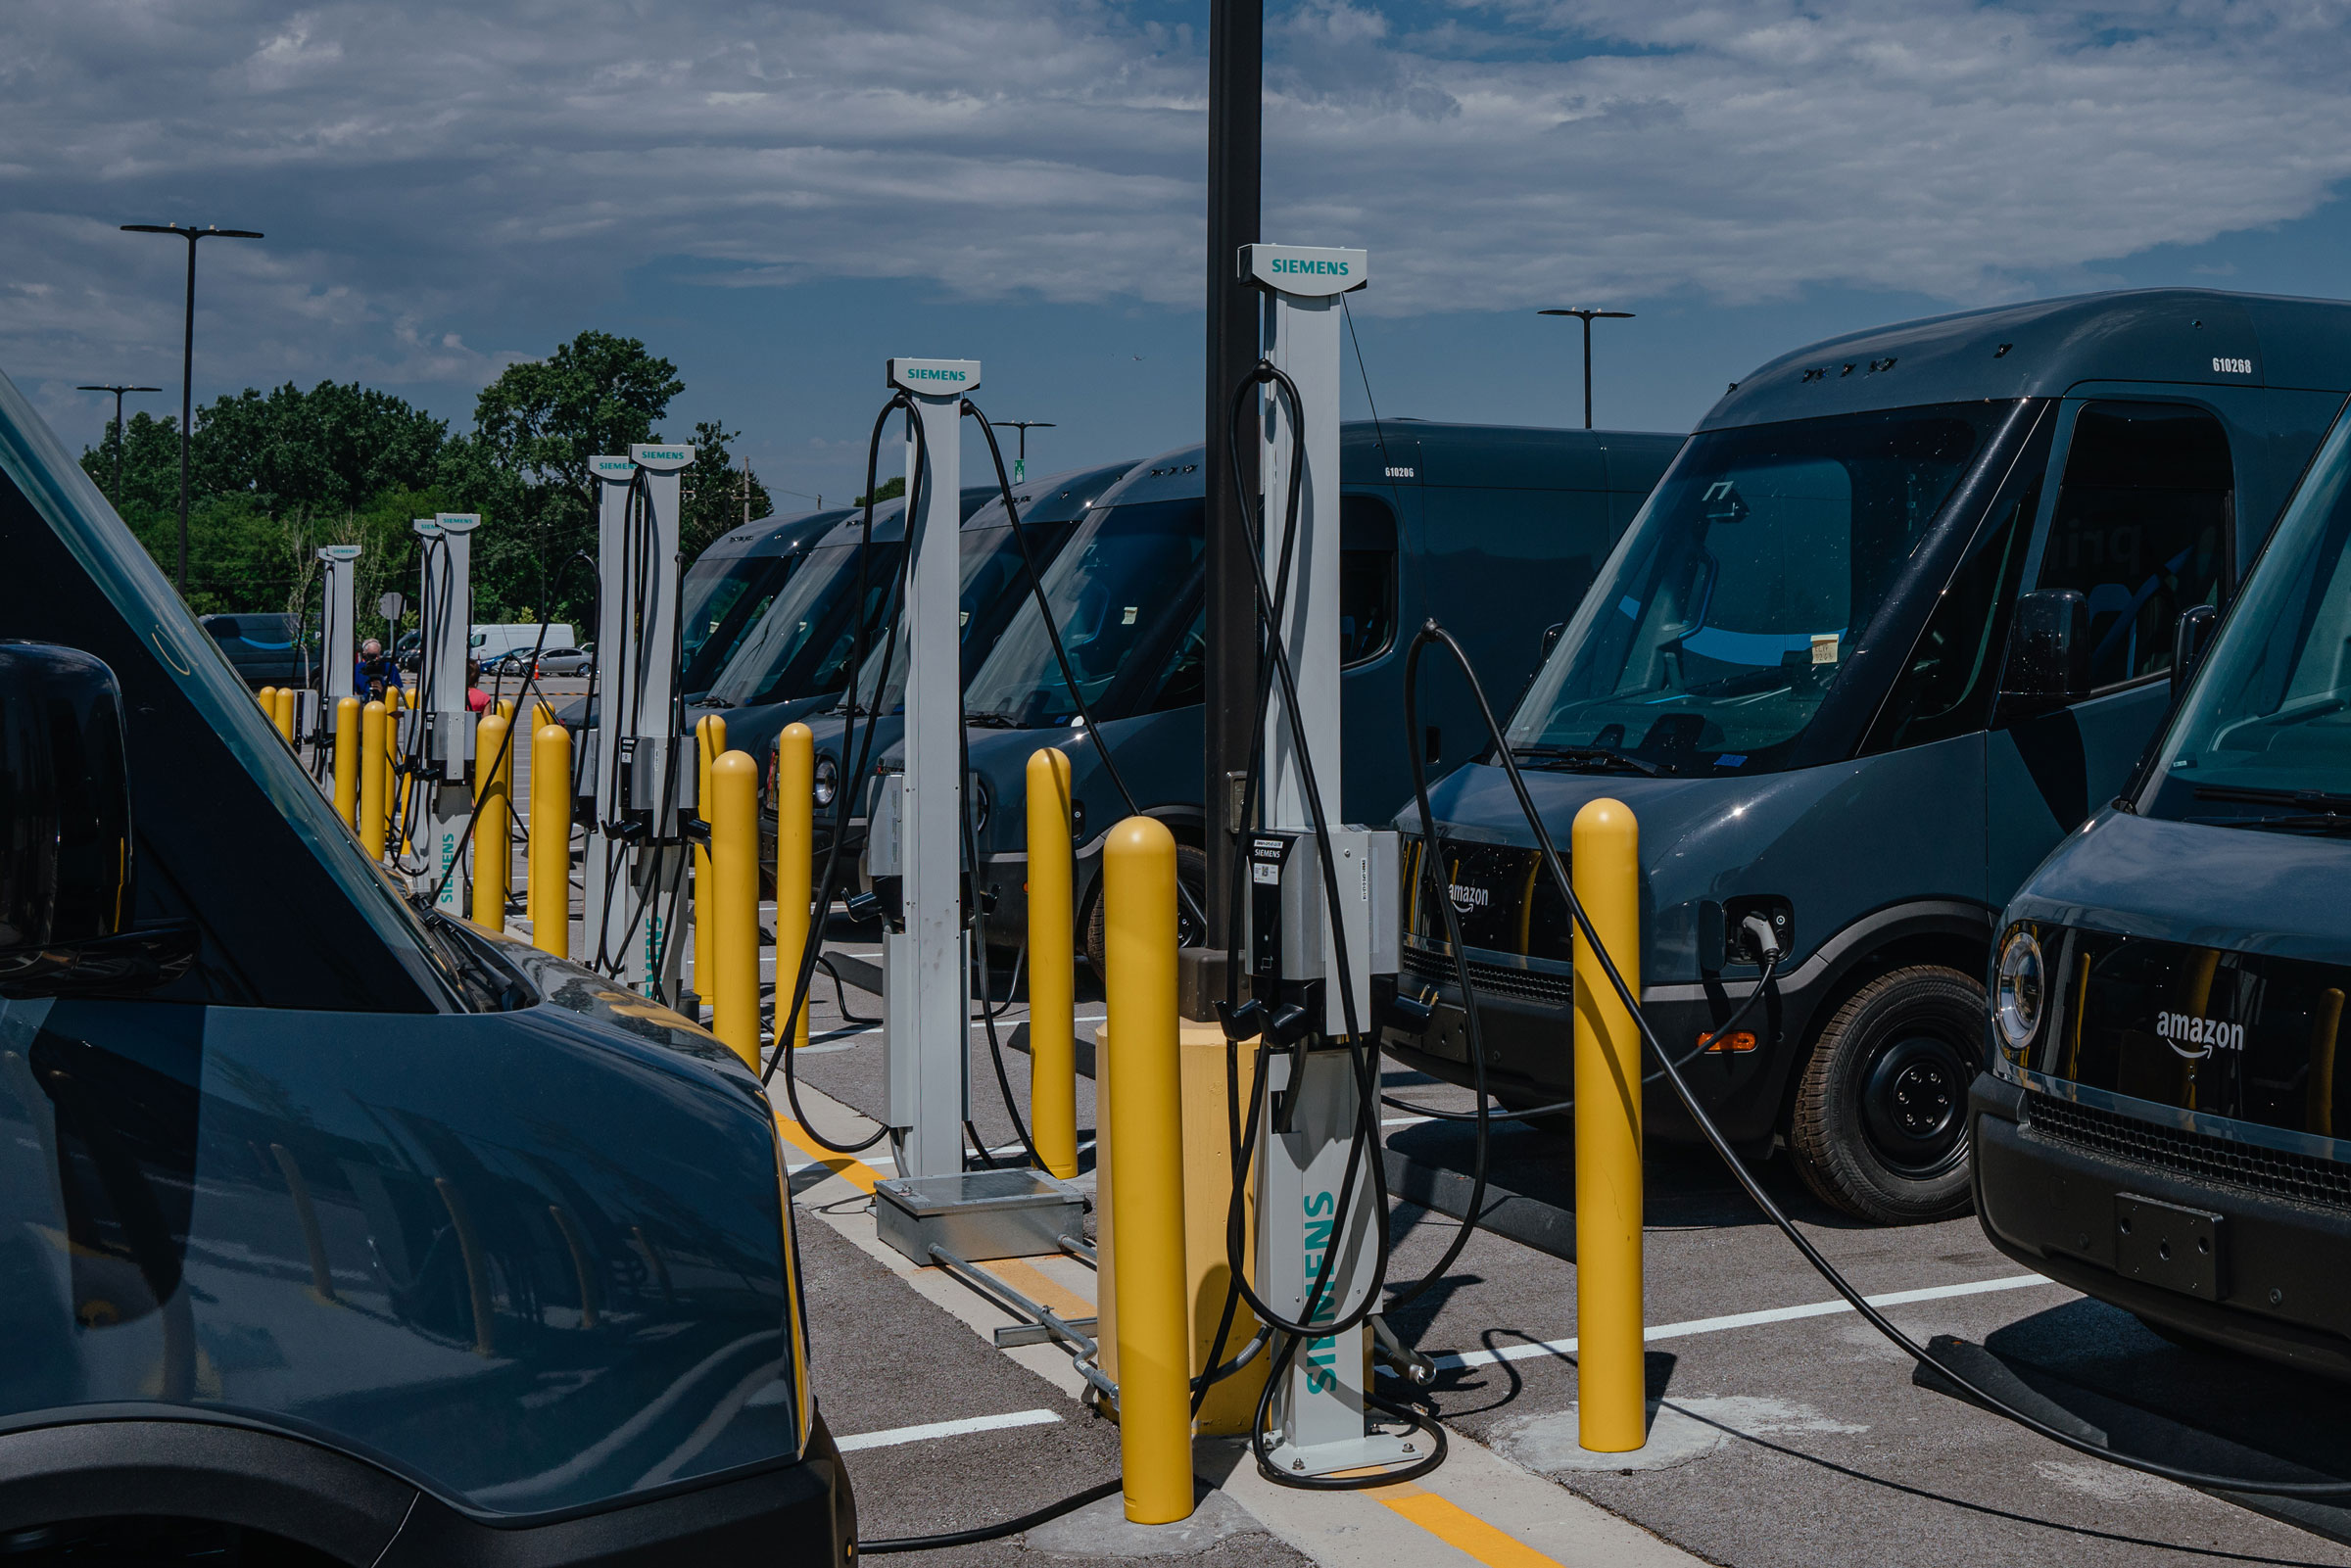 Amazon delivery electric vans plugged into electric charging stations